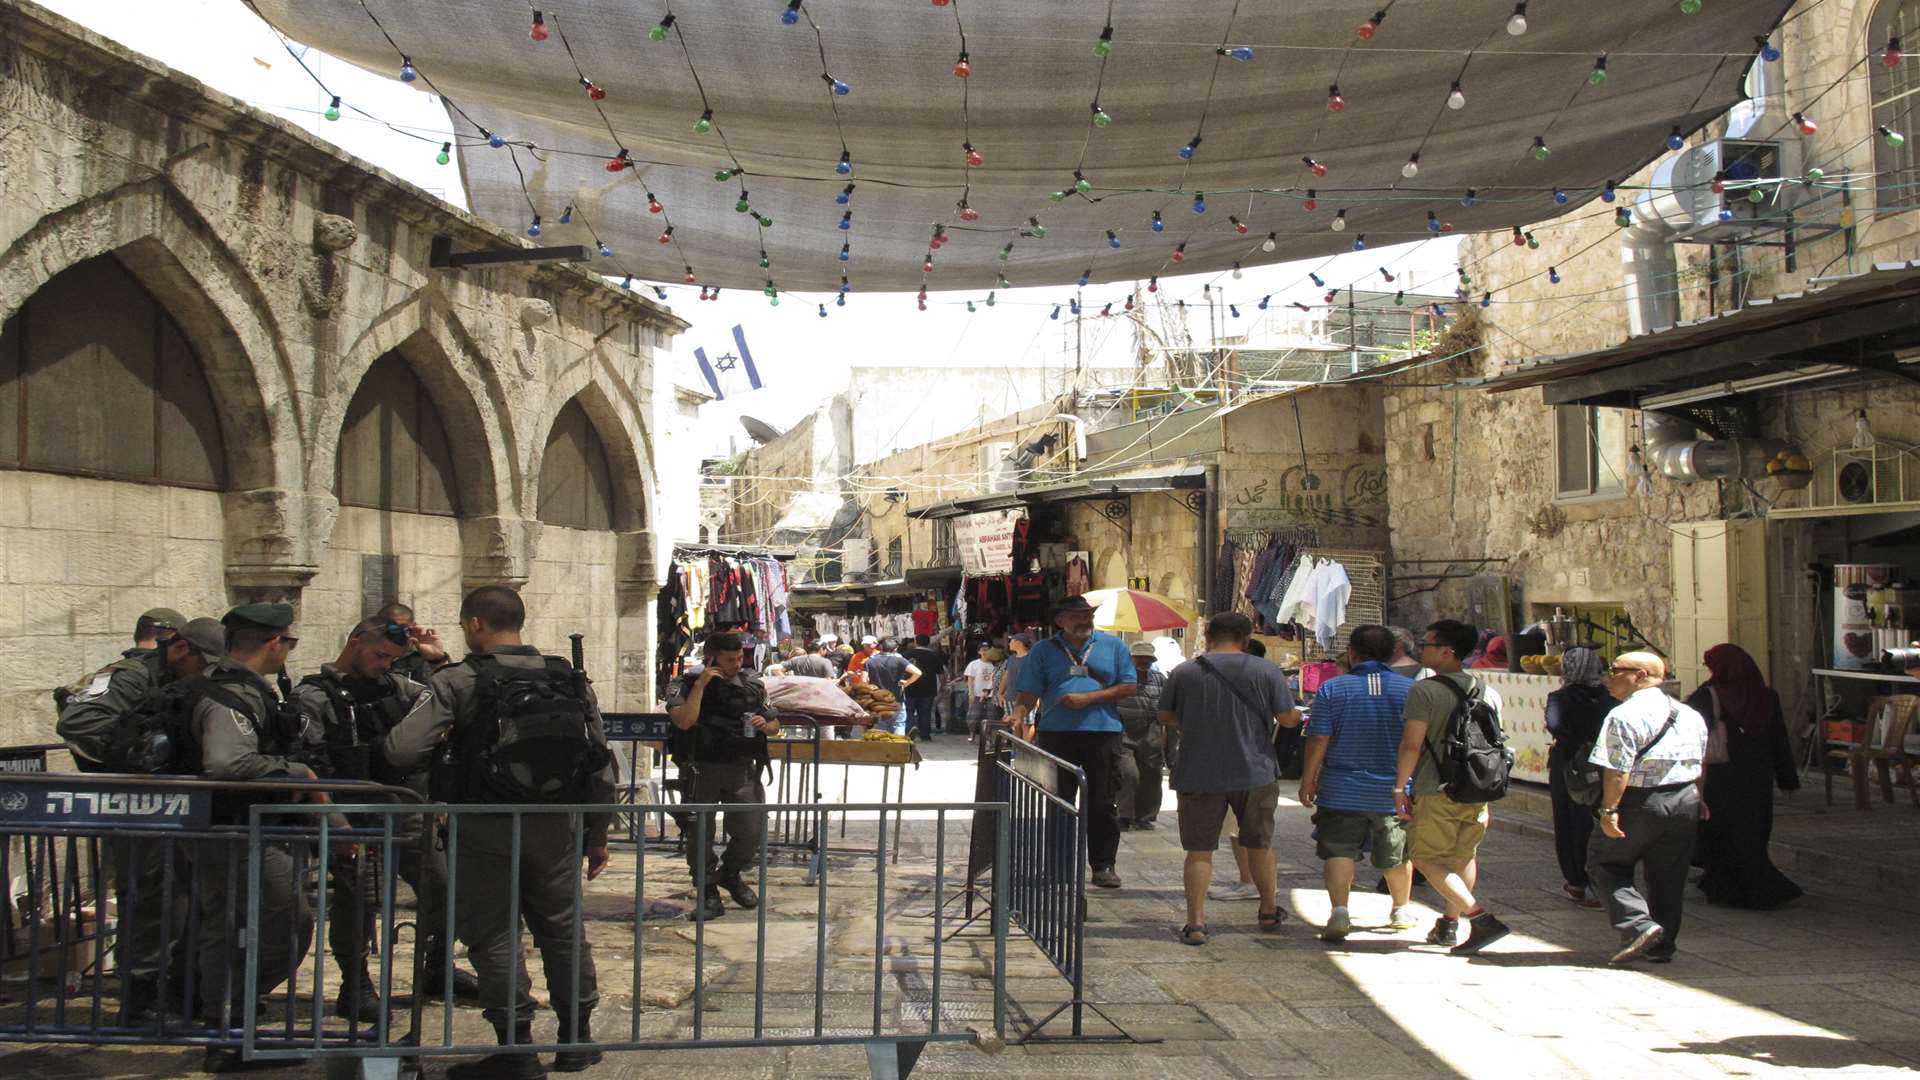 Armed police patrolled Jerusalem's Old City but their presence didn't spoil the atmosphere